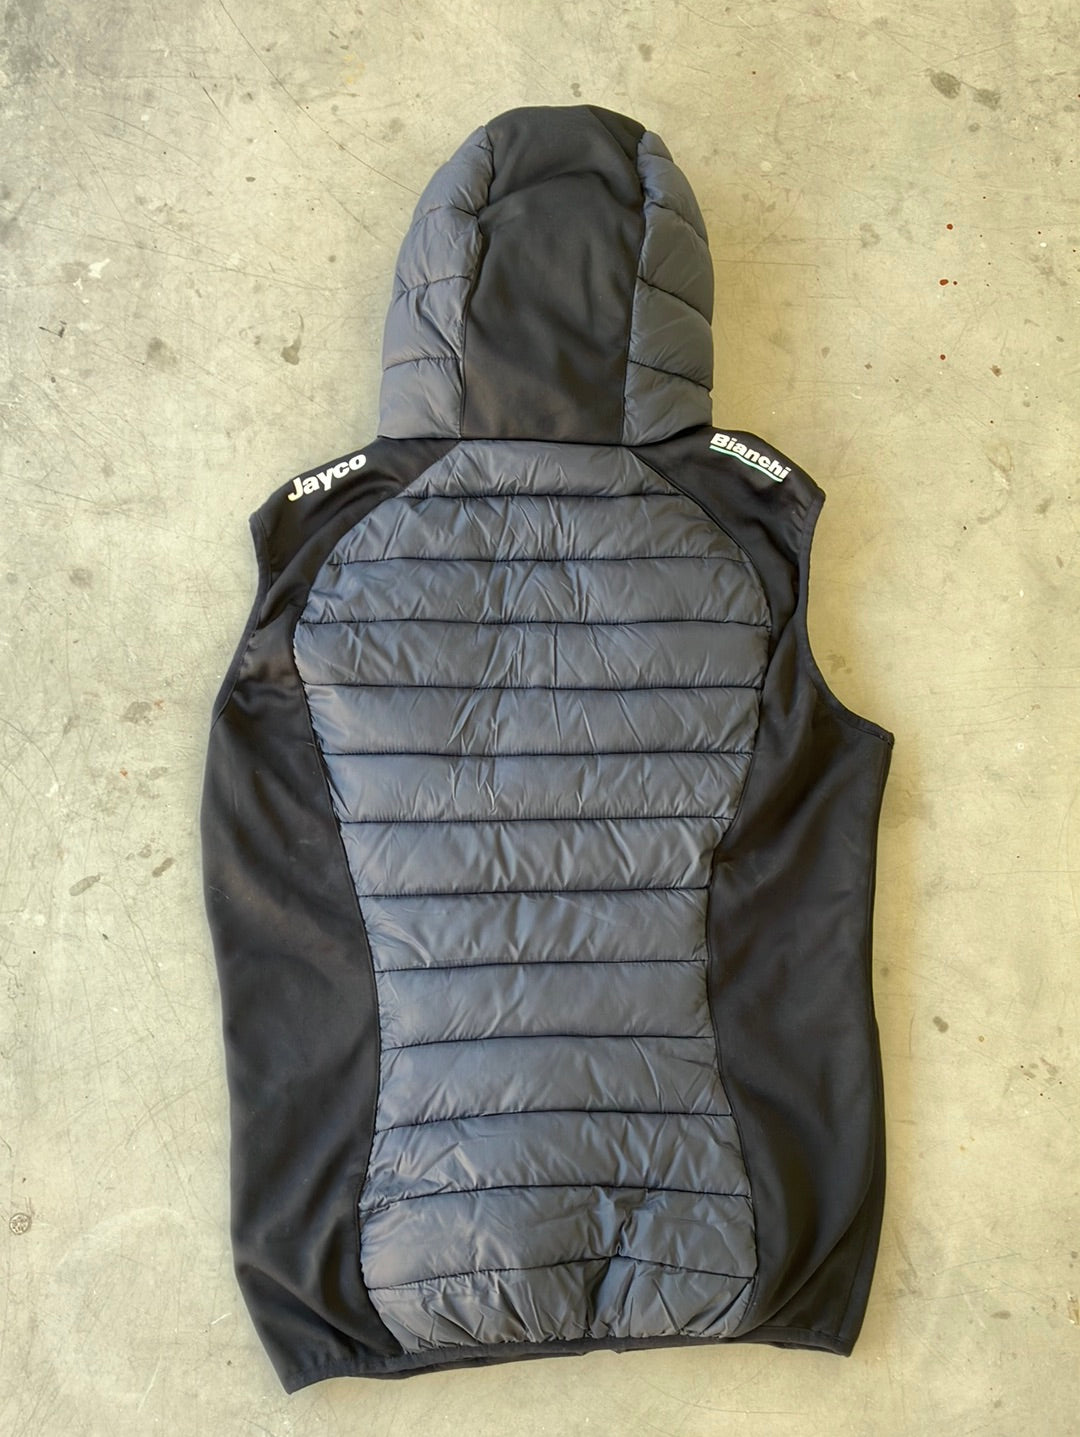 (Copy) Casual Hooded Vest / Gilet Thermal Padded Jacket team-Issued | Giordana | Bianchi Bike Exchange | Pro Cycling Kit